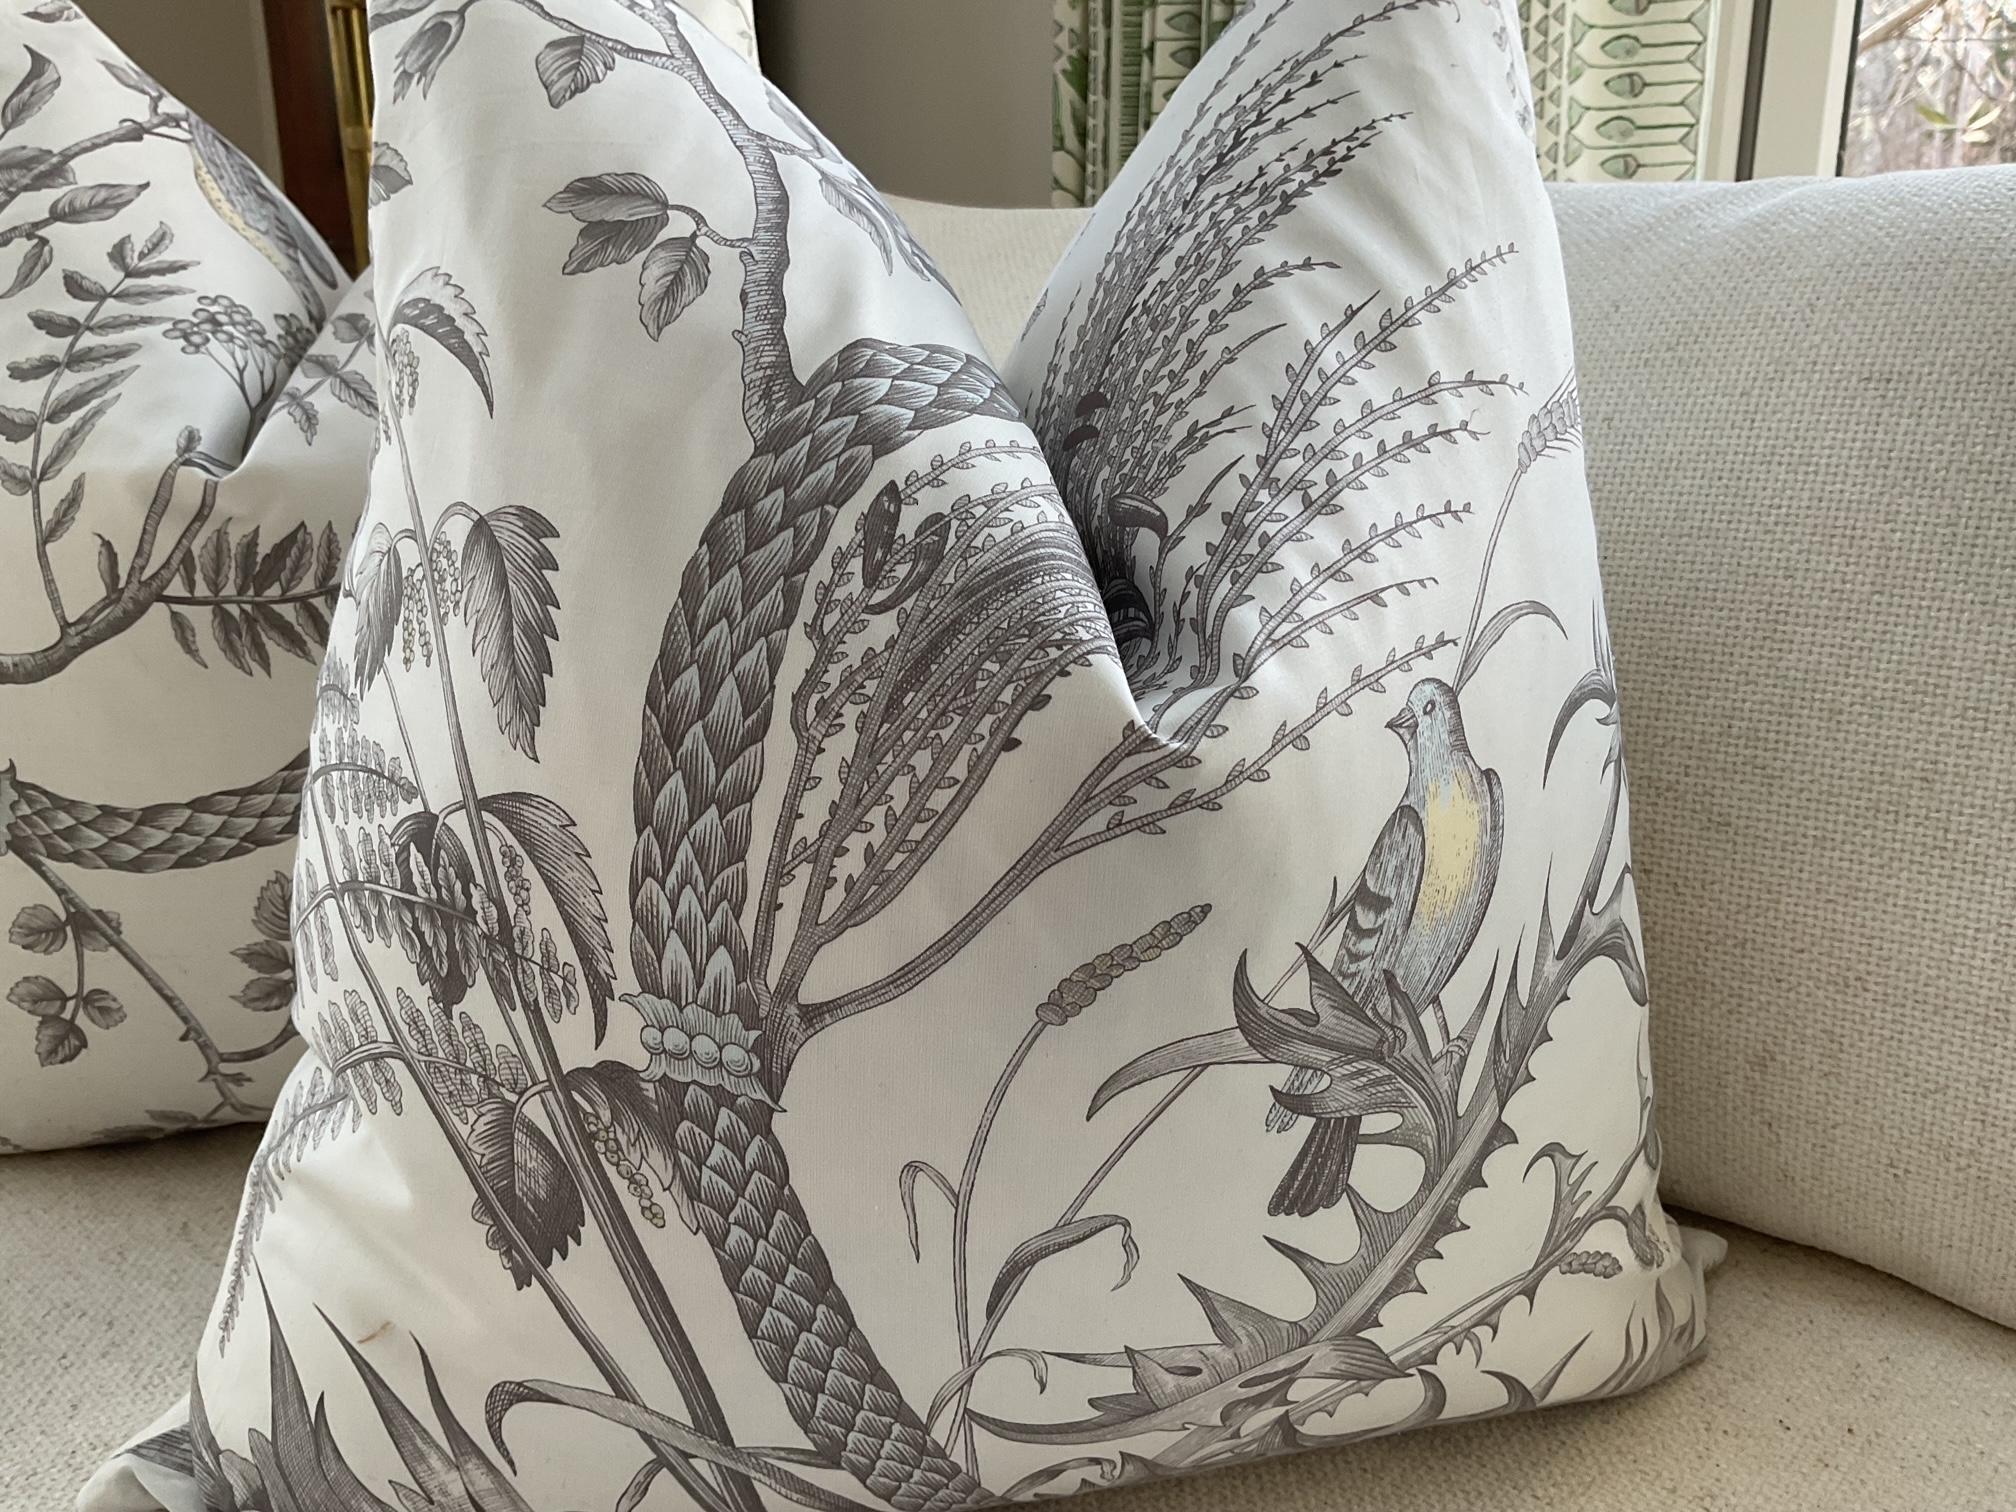 North American Brunschwig and Fils Bird and Thistle in Gray Pillows - a Pair For Sale